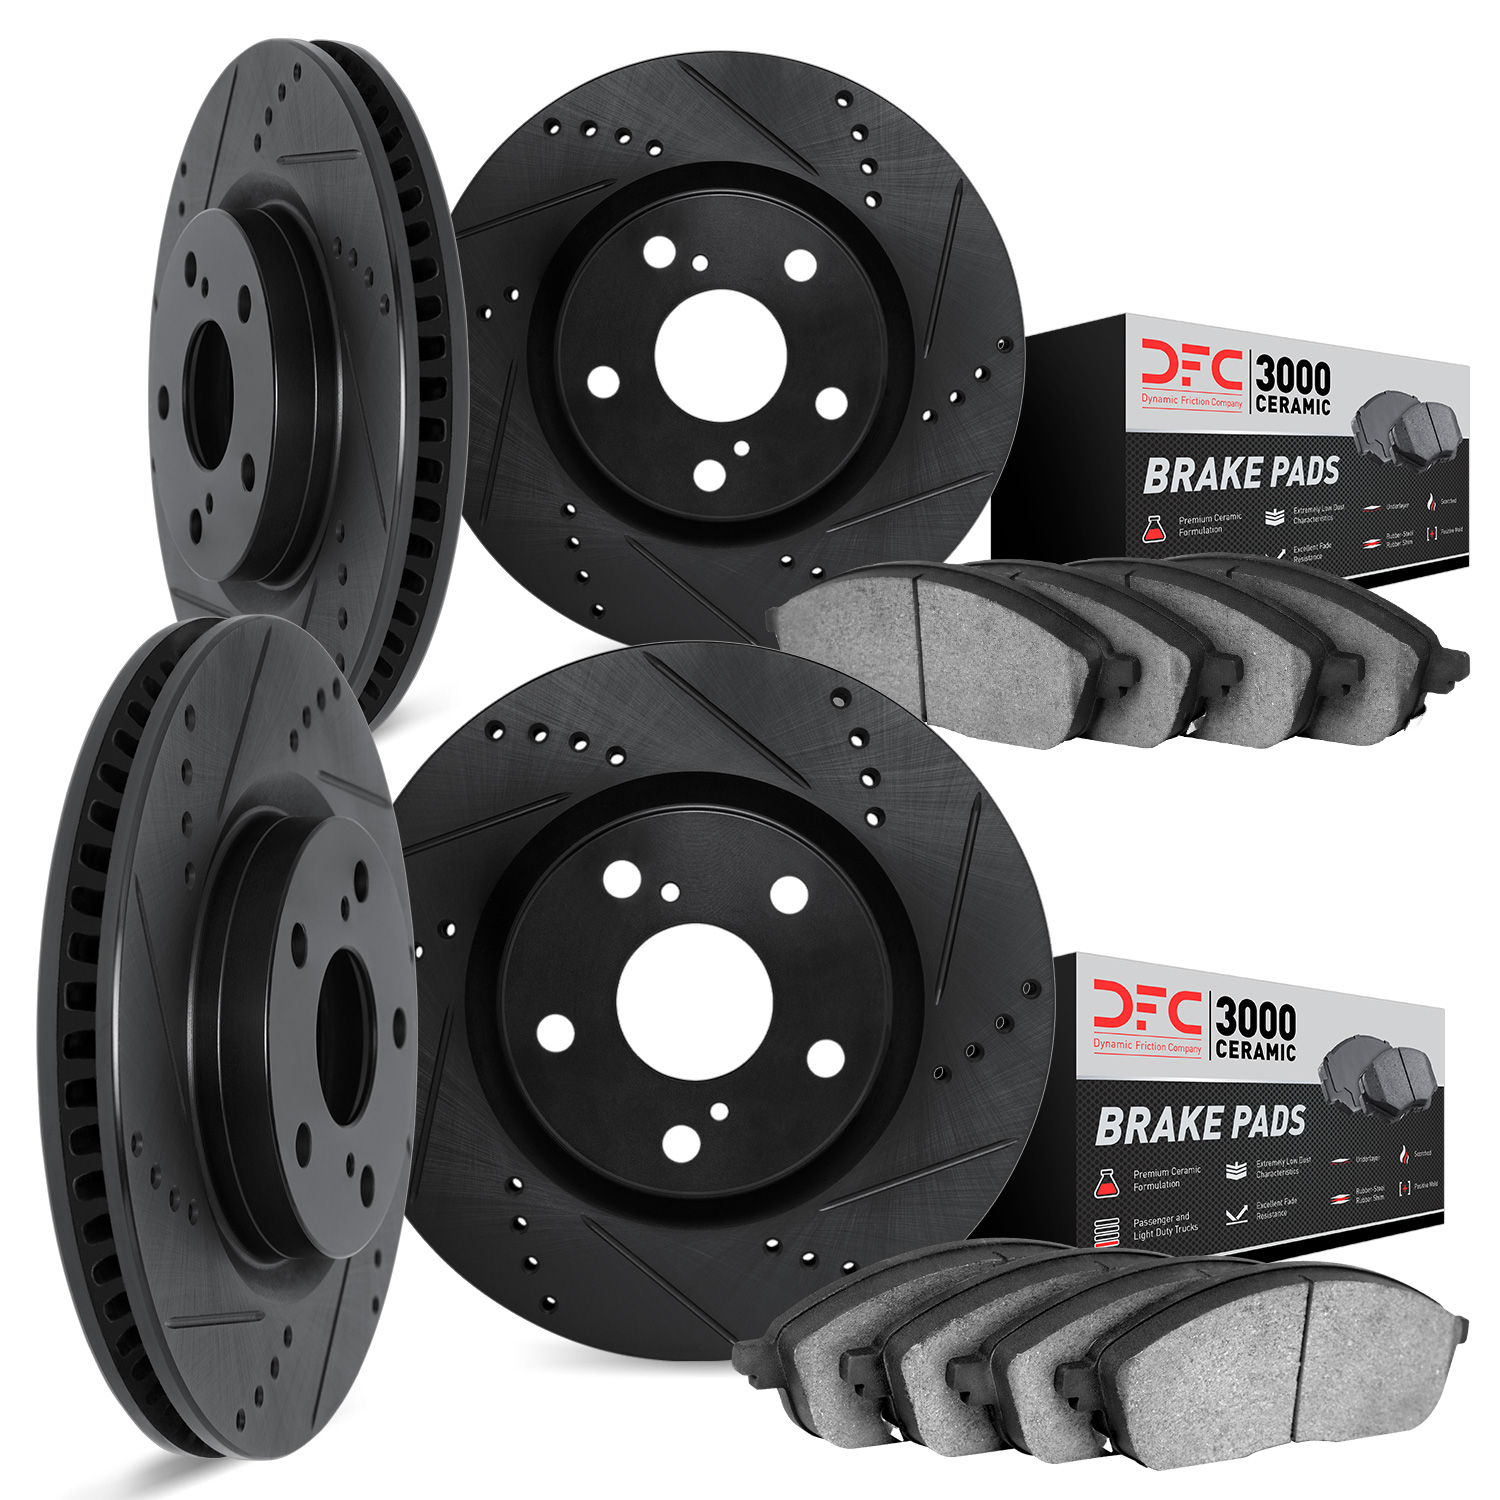 8304-13035 Drilled/Slotted Brake Rotors with 3000-Series Ceramic Brake Pads Kit [Black], 2014-2018 Subaru, Position: Front and R